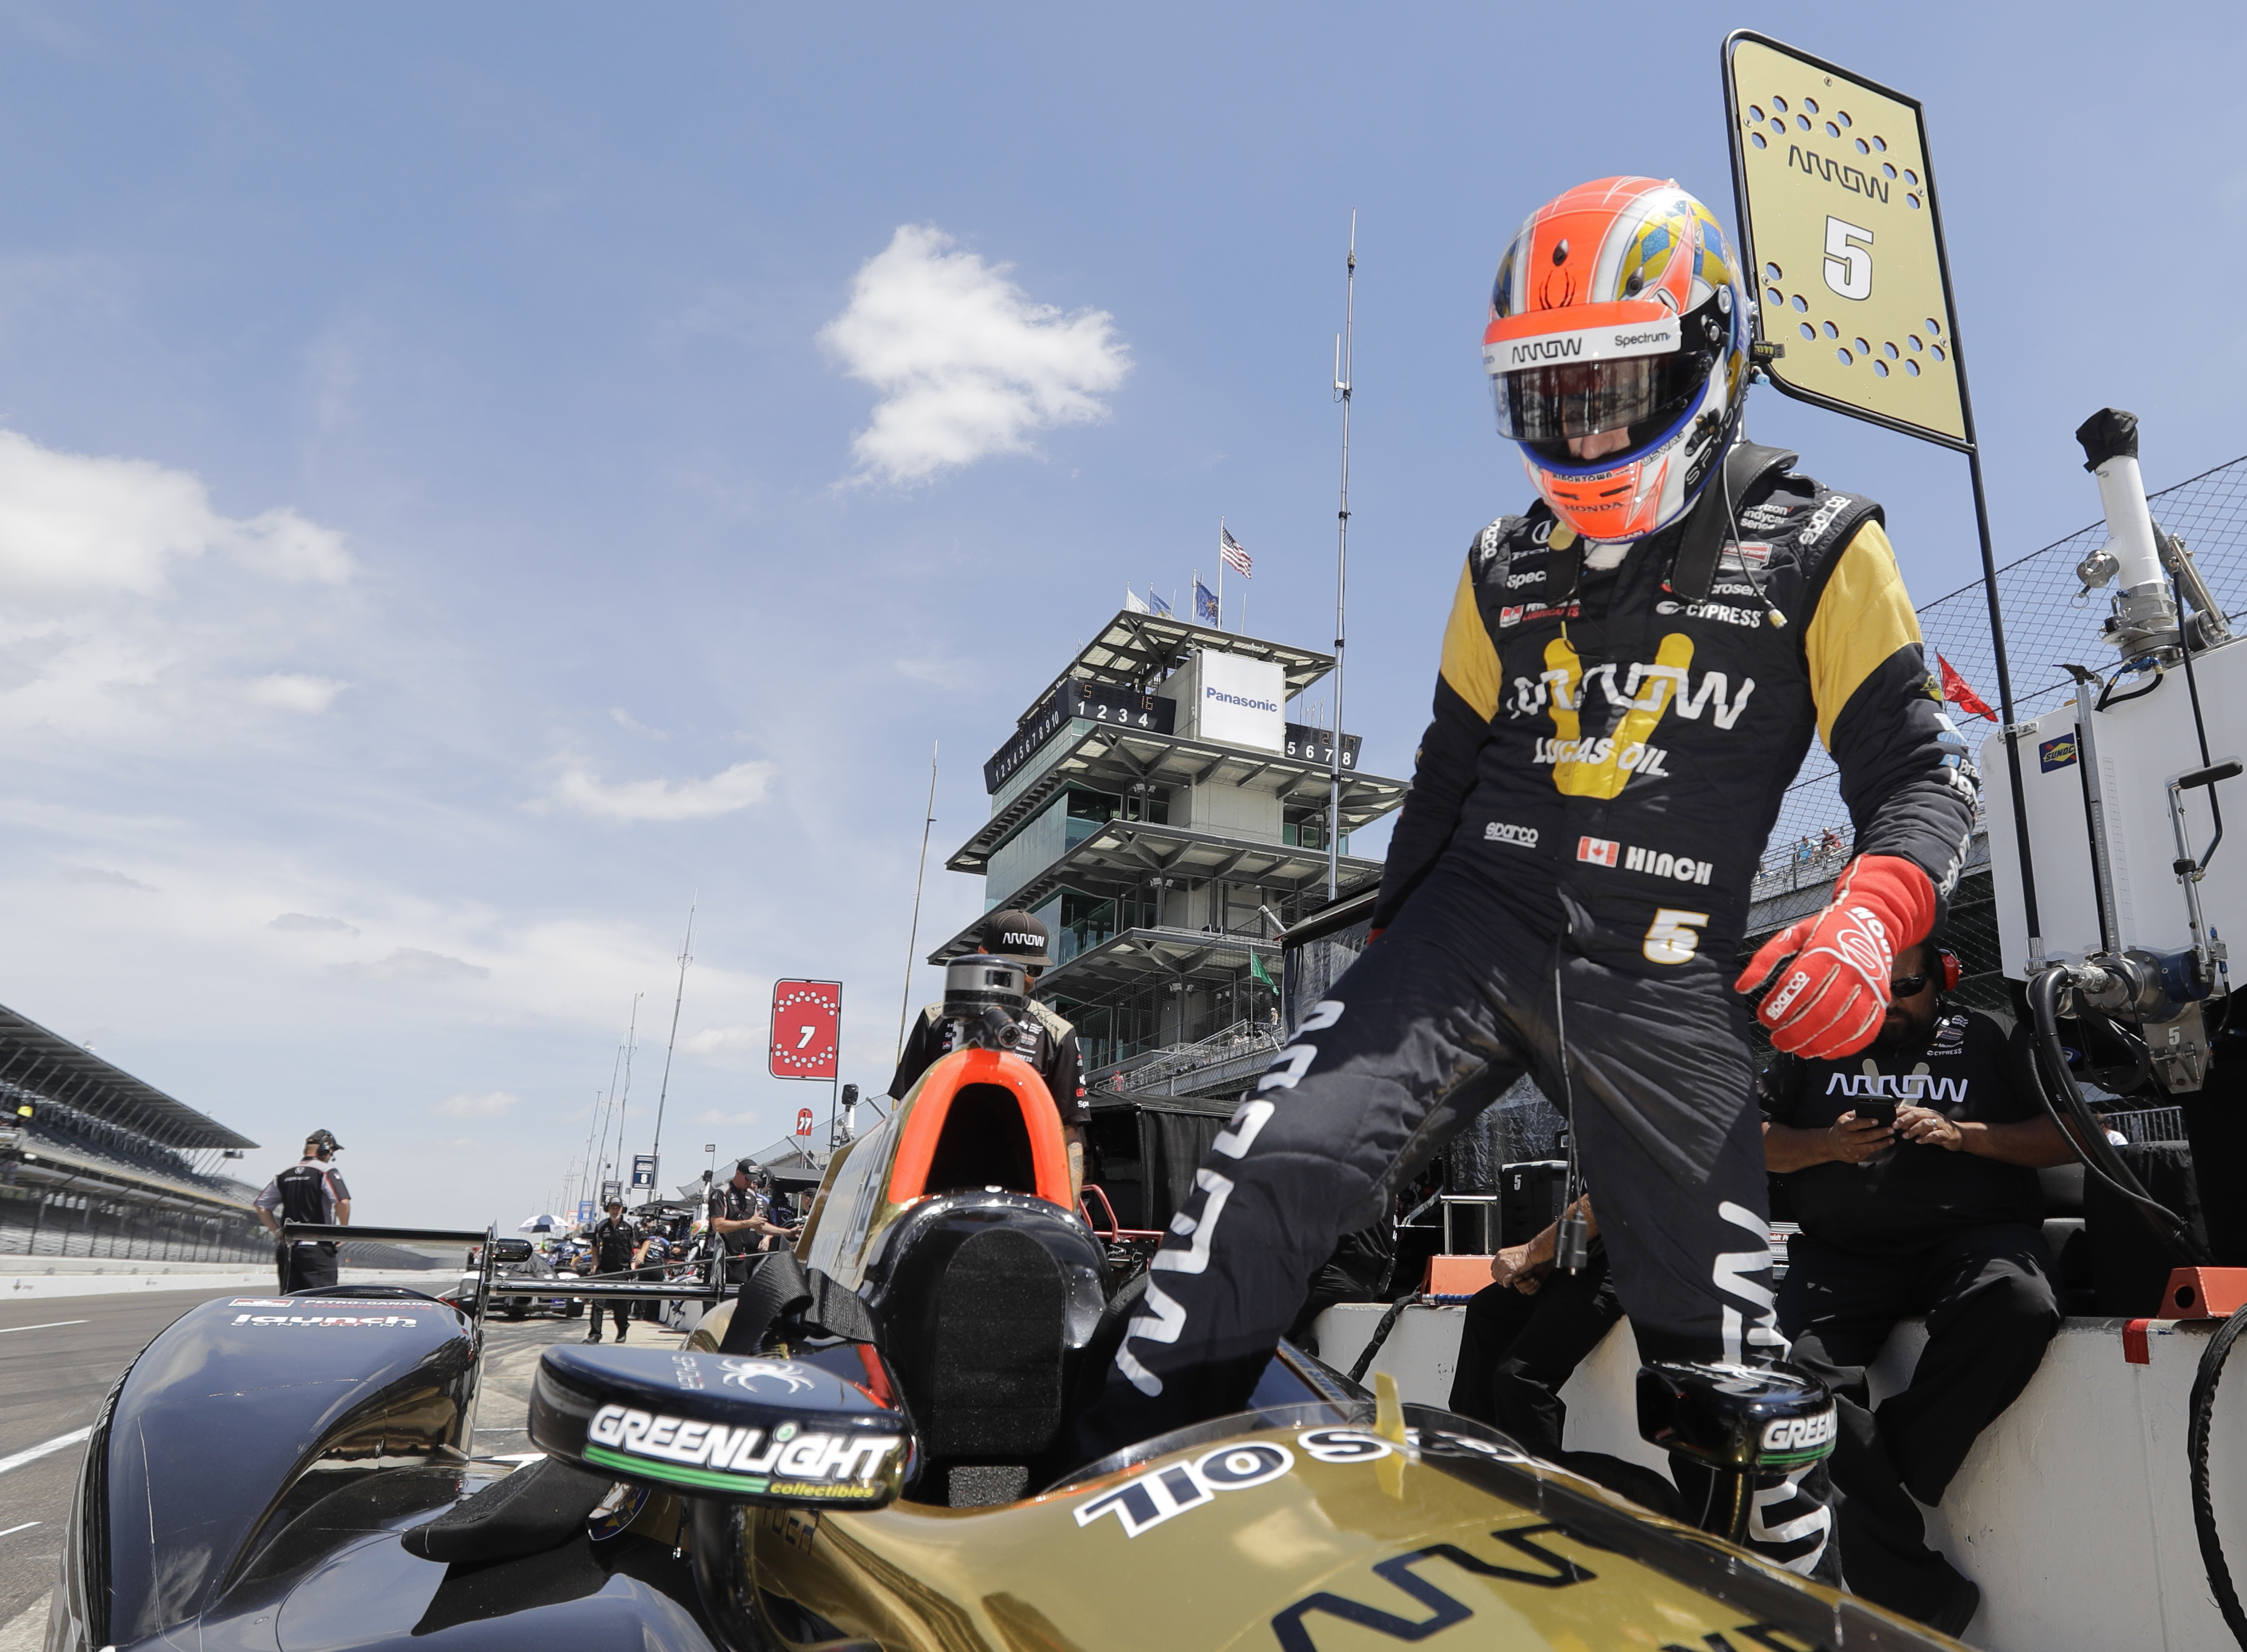 Indy 500 Drivers Race Past Talk of Their Insurance, Says Agent